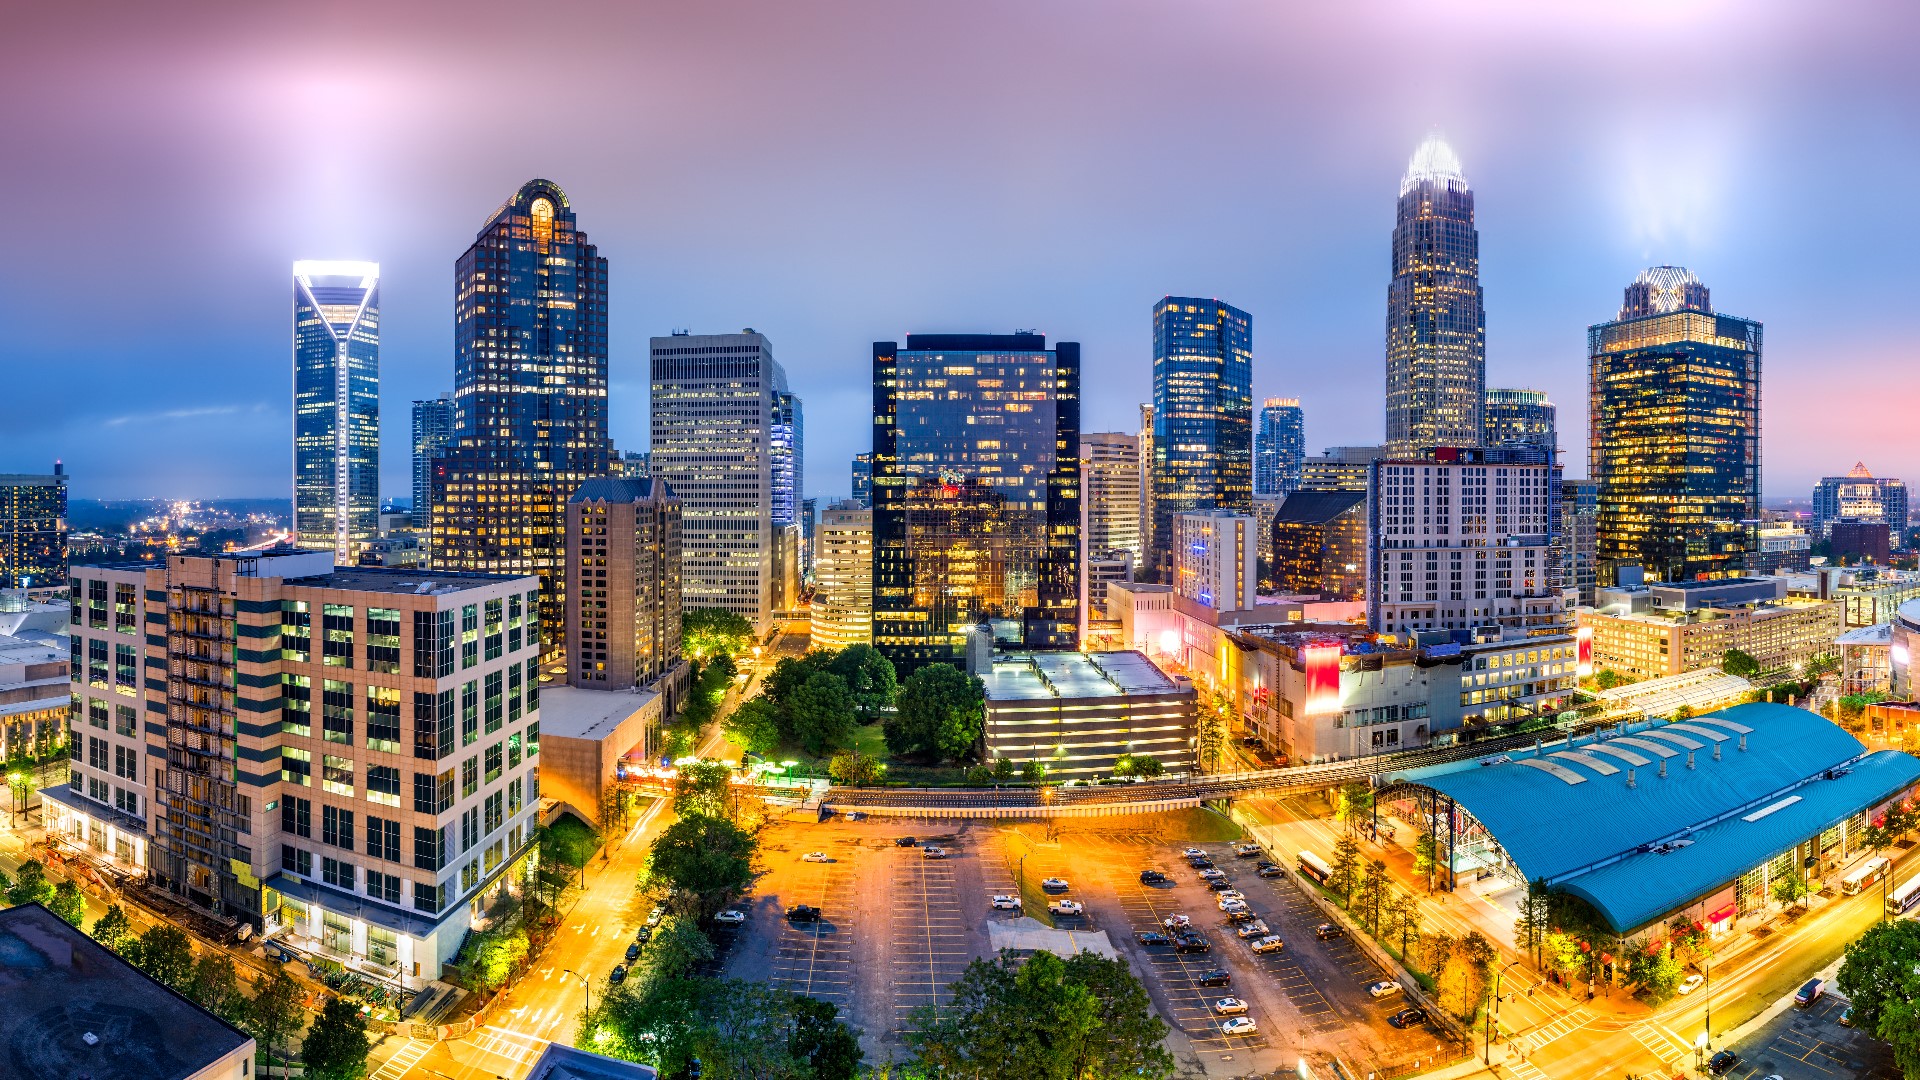 US News is listing Charlotte as the 22nd fastest-growing city this year.